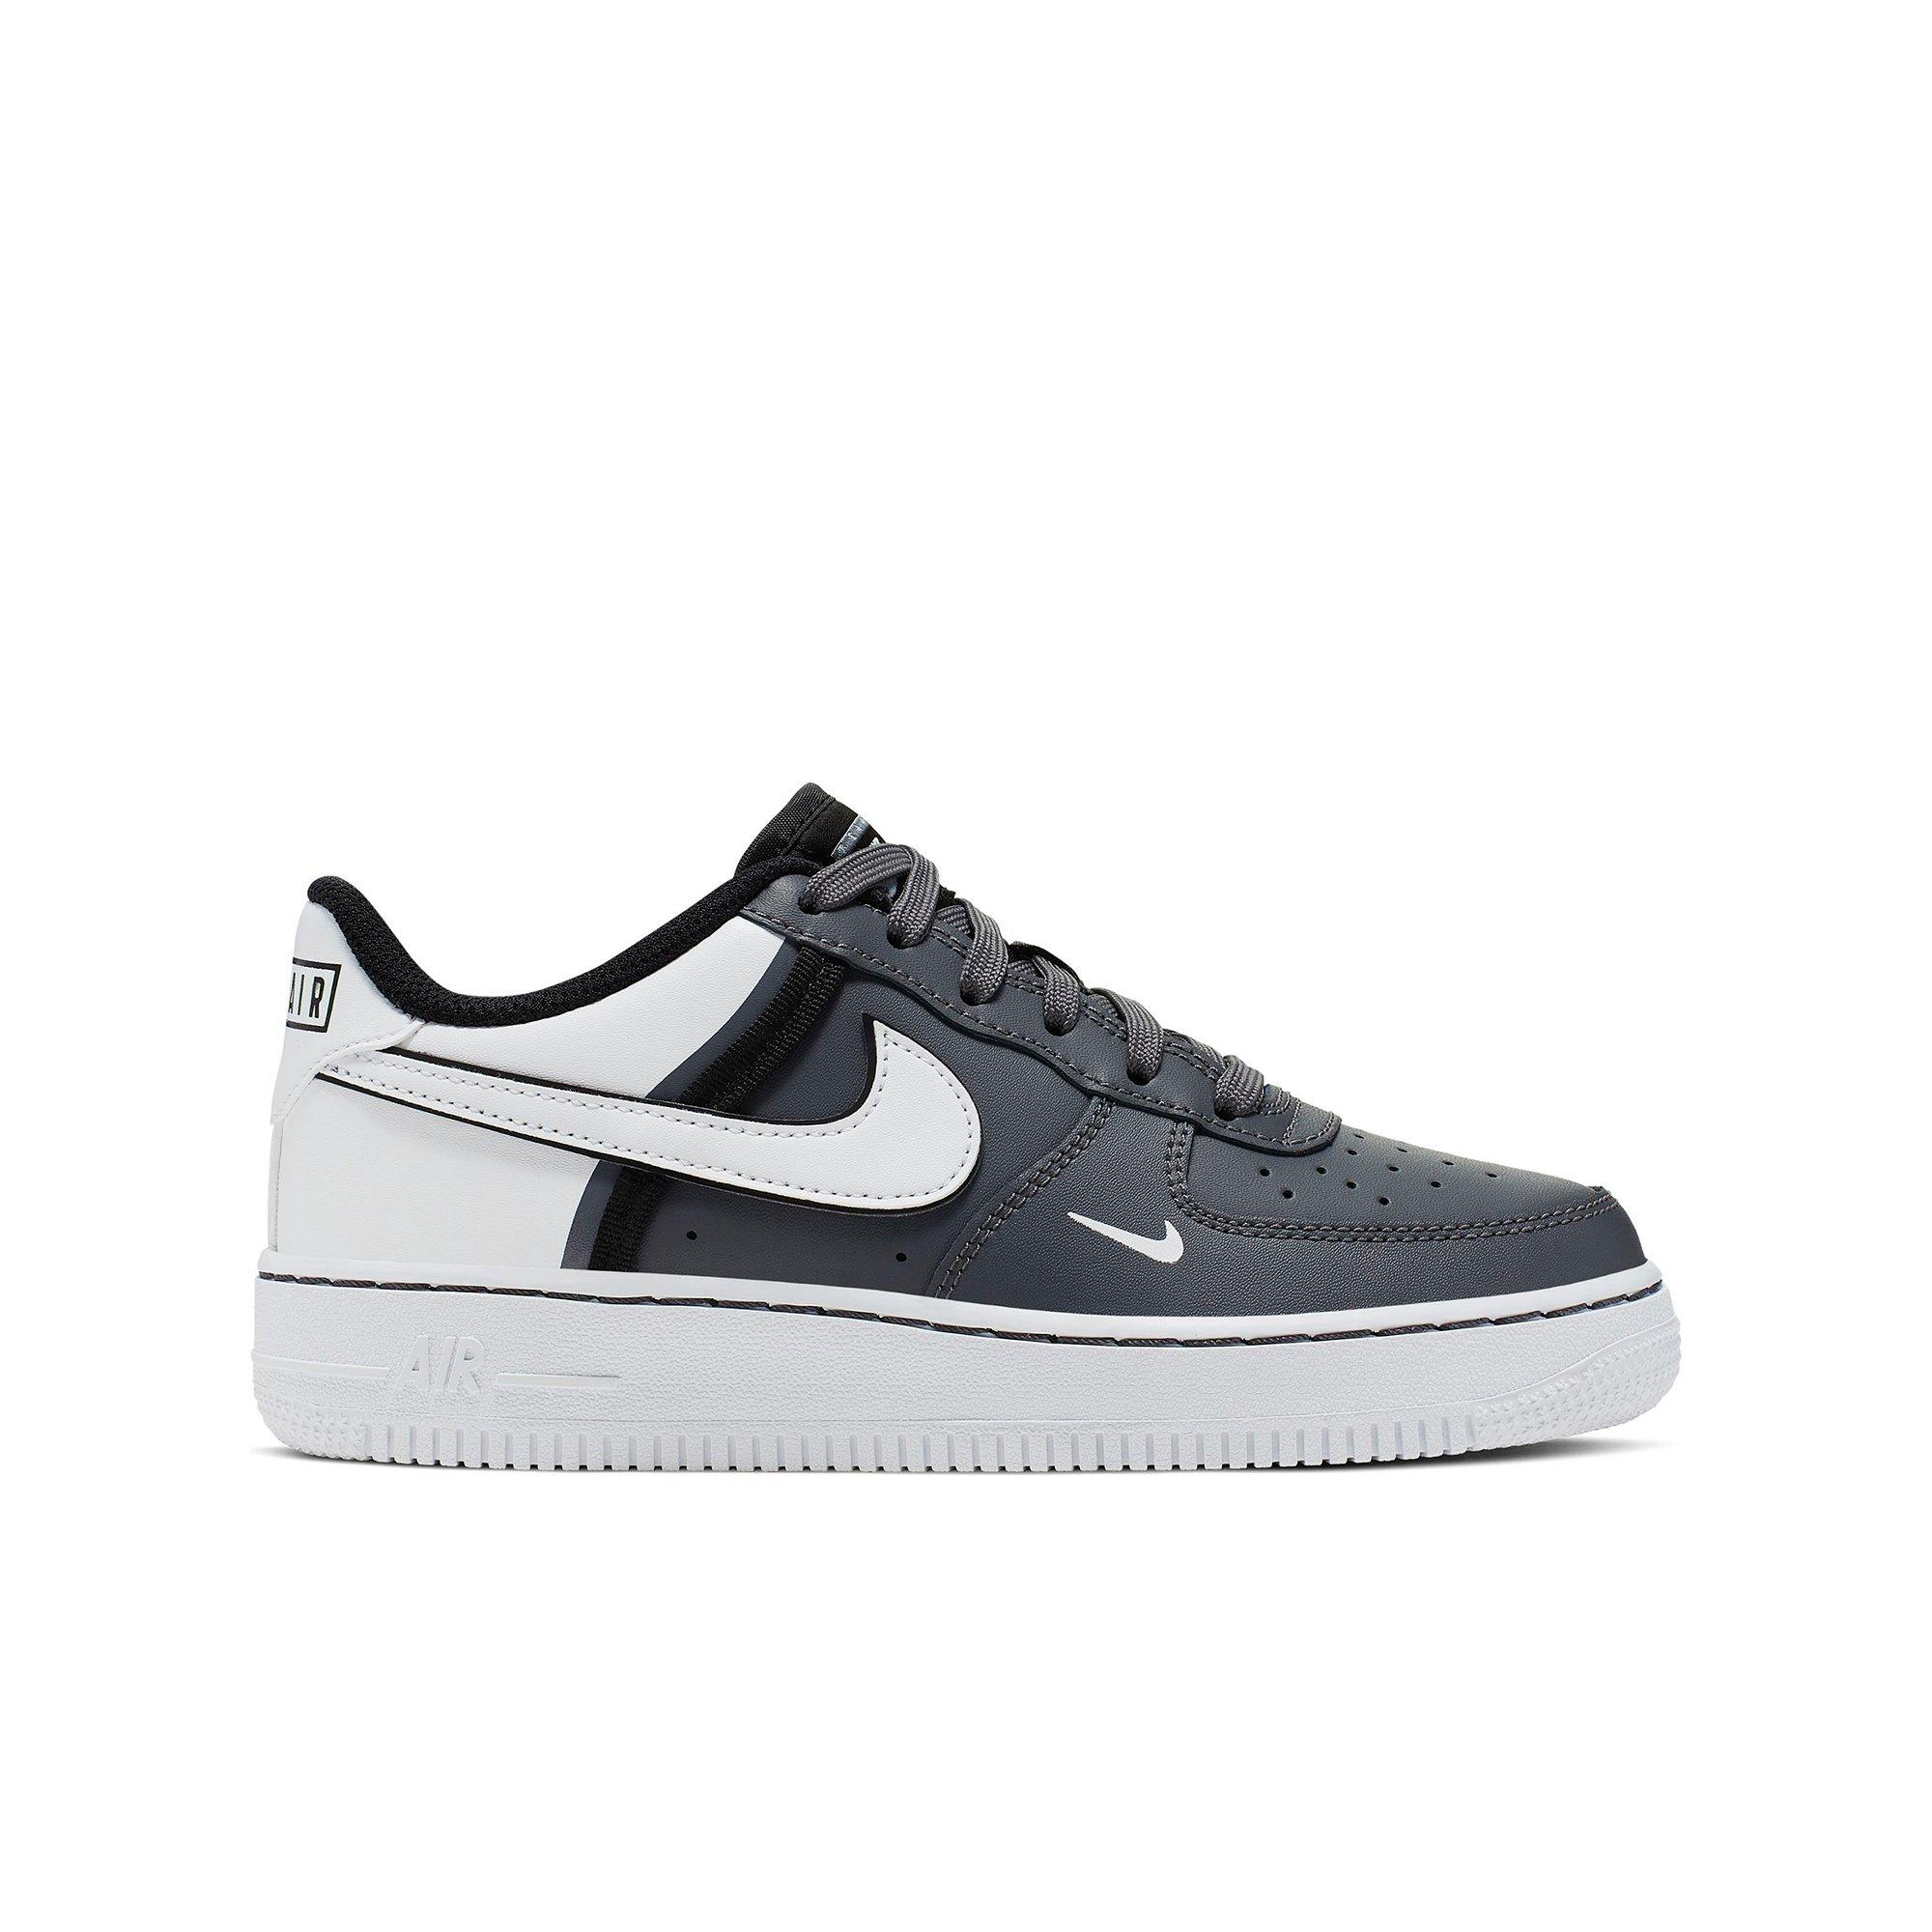 grey airforce 1s